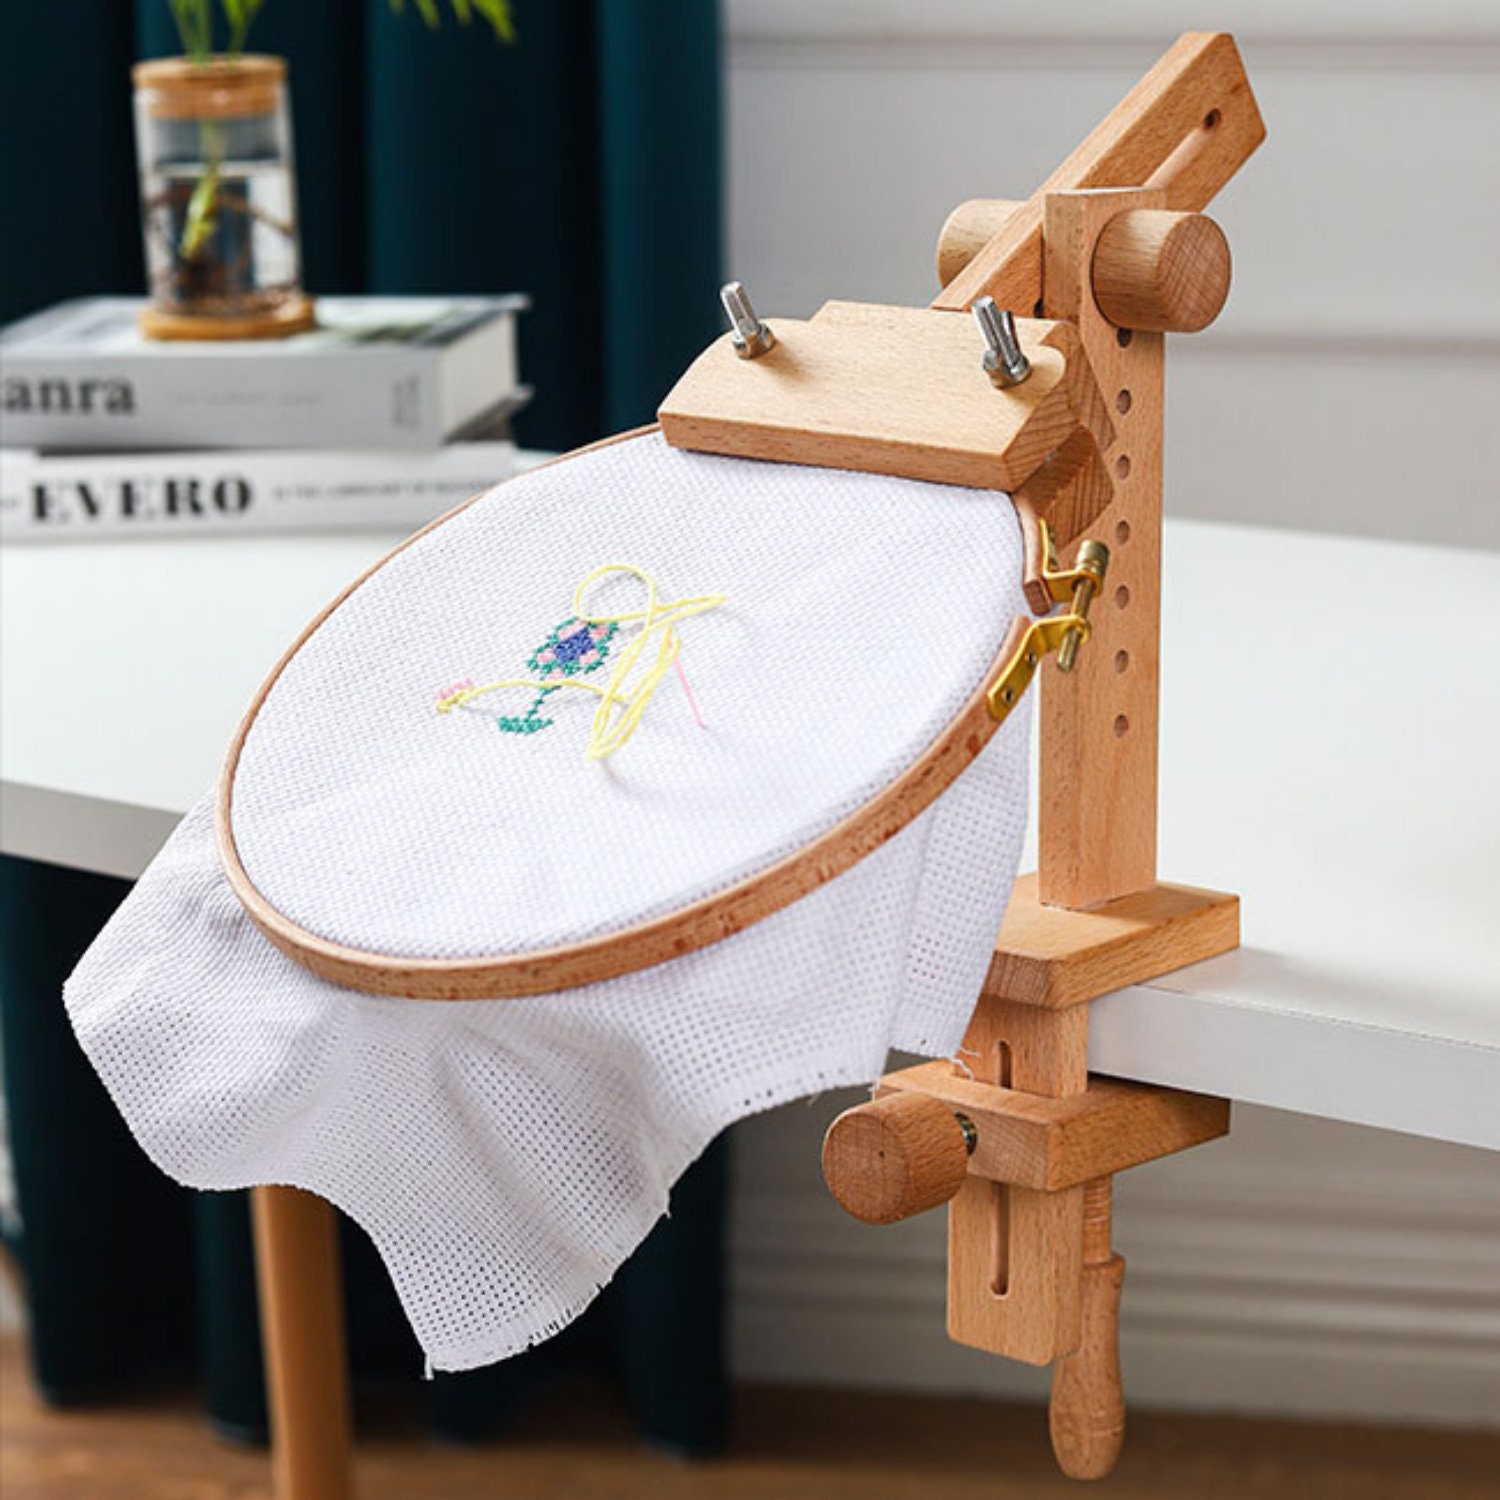 Embroidery Hoop Stand,Embroidery Hoop Stand Floor Stand Wooden,Rotatable  Embroidery Lap Stand Adjustable Clamp,Beginner Cross Stitch Rack Tapestry  Hoop Holder,Circle Hoop Stitchwork 